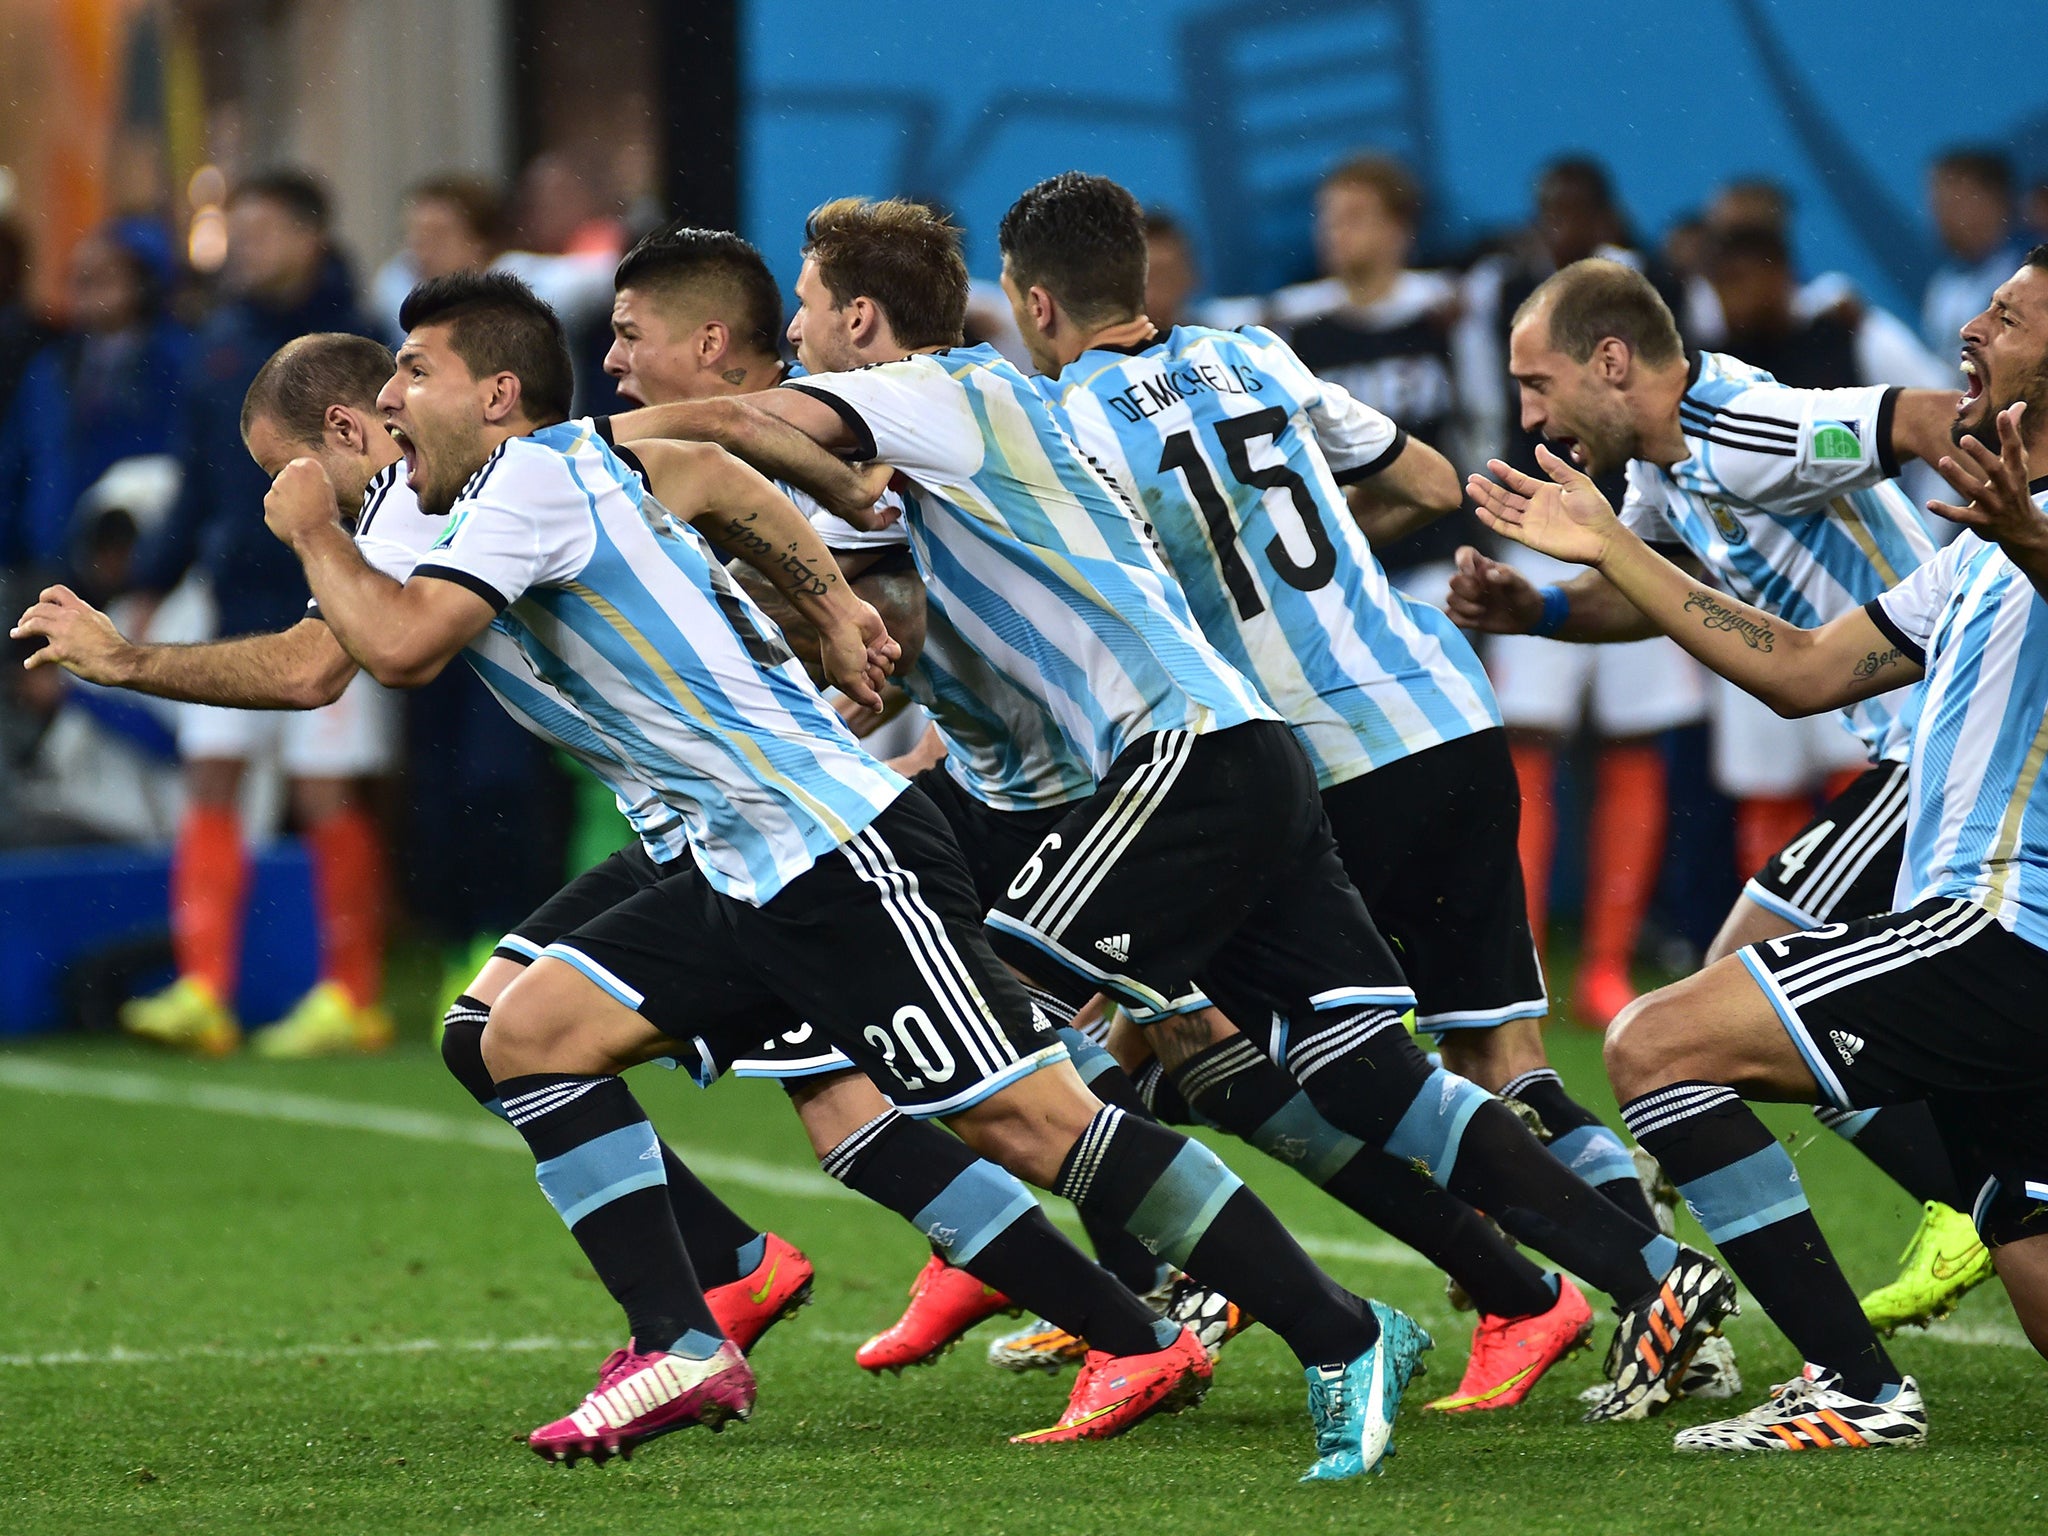 Argentina's players run to celebrate their victory after a penalty shoot out following extra-time in the semi-final football match between Netherlands and Argentina of the FIFA World Cup at The Corinthians Arena in Sao Paulo